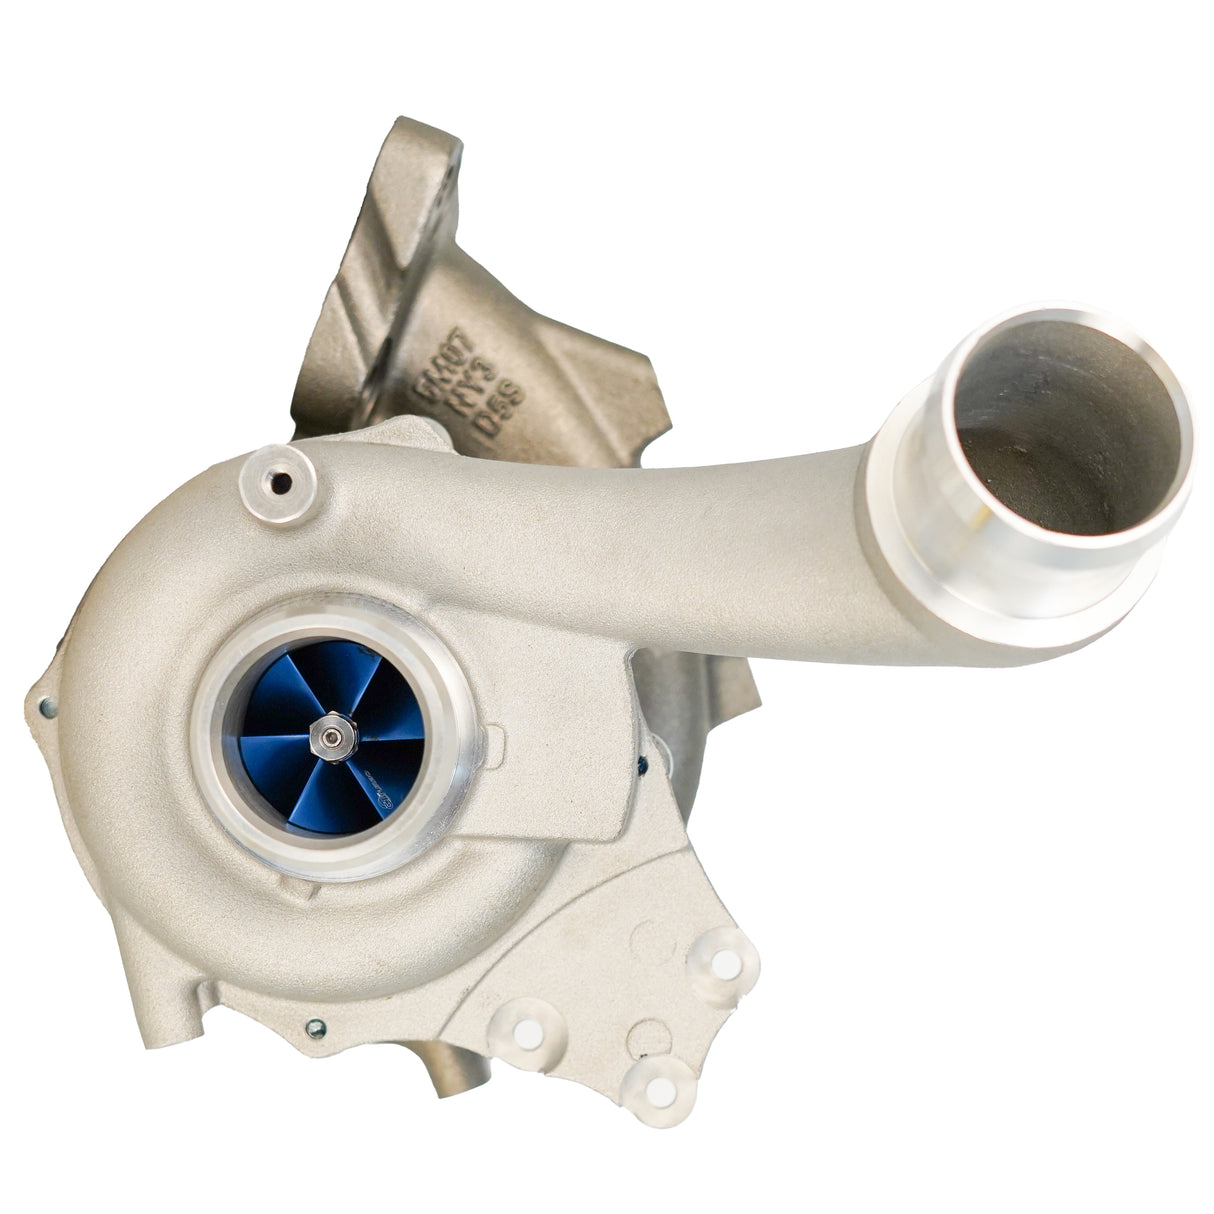 CCT Stage One Billet Turbo charger To Suit Nissan Navara D40 YD25 2.5L &amp; Nissan Pathfinder R51 2.5L / without EA